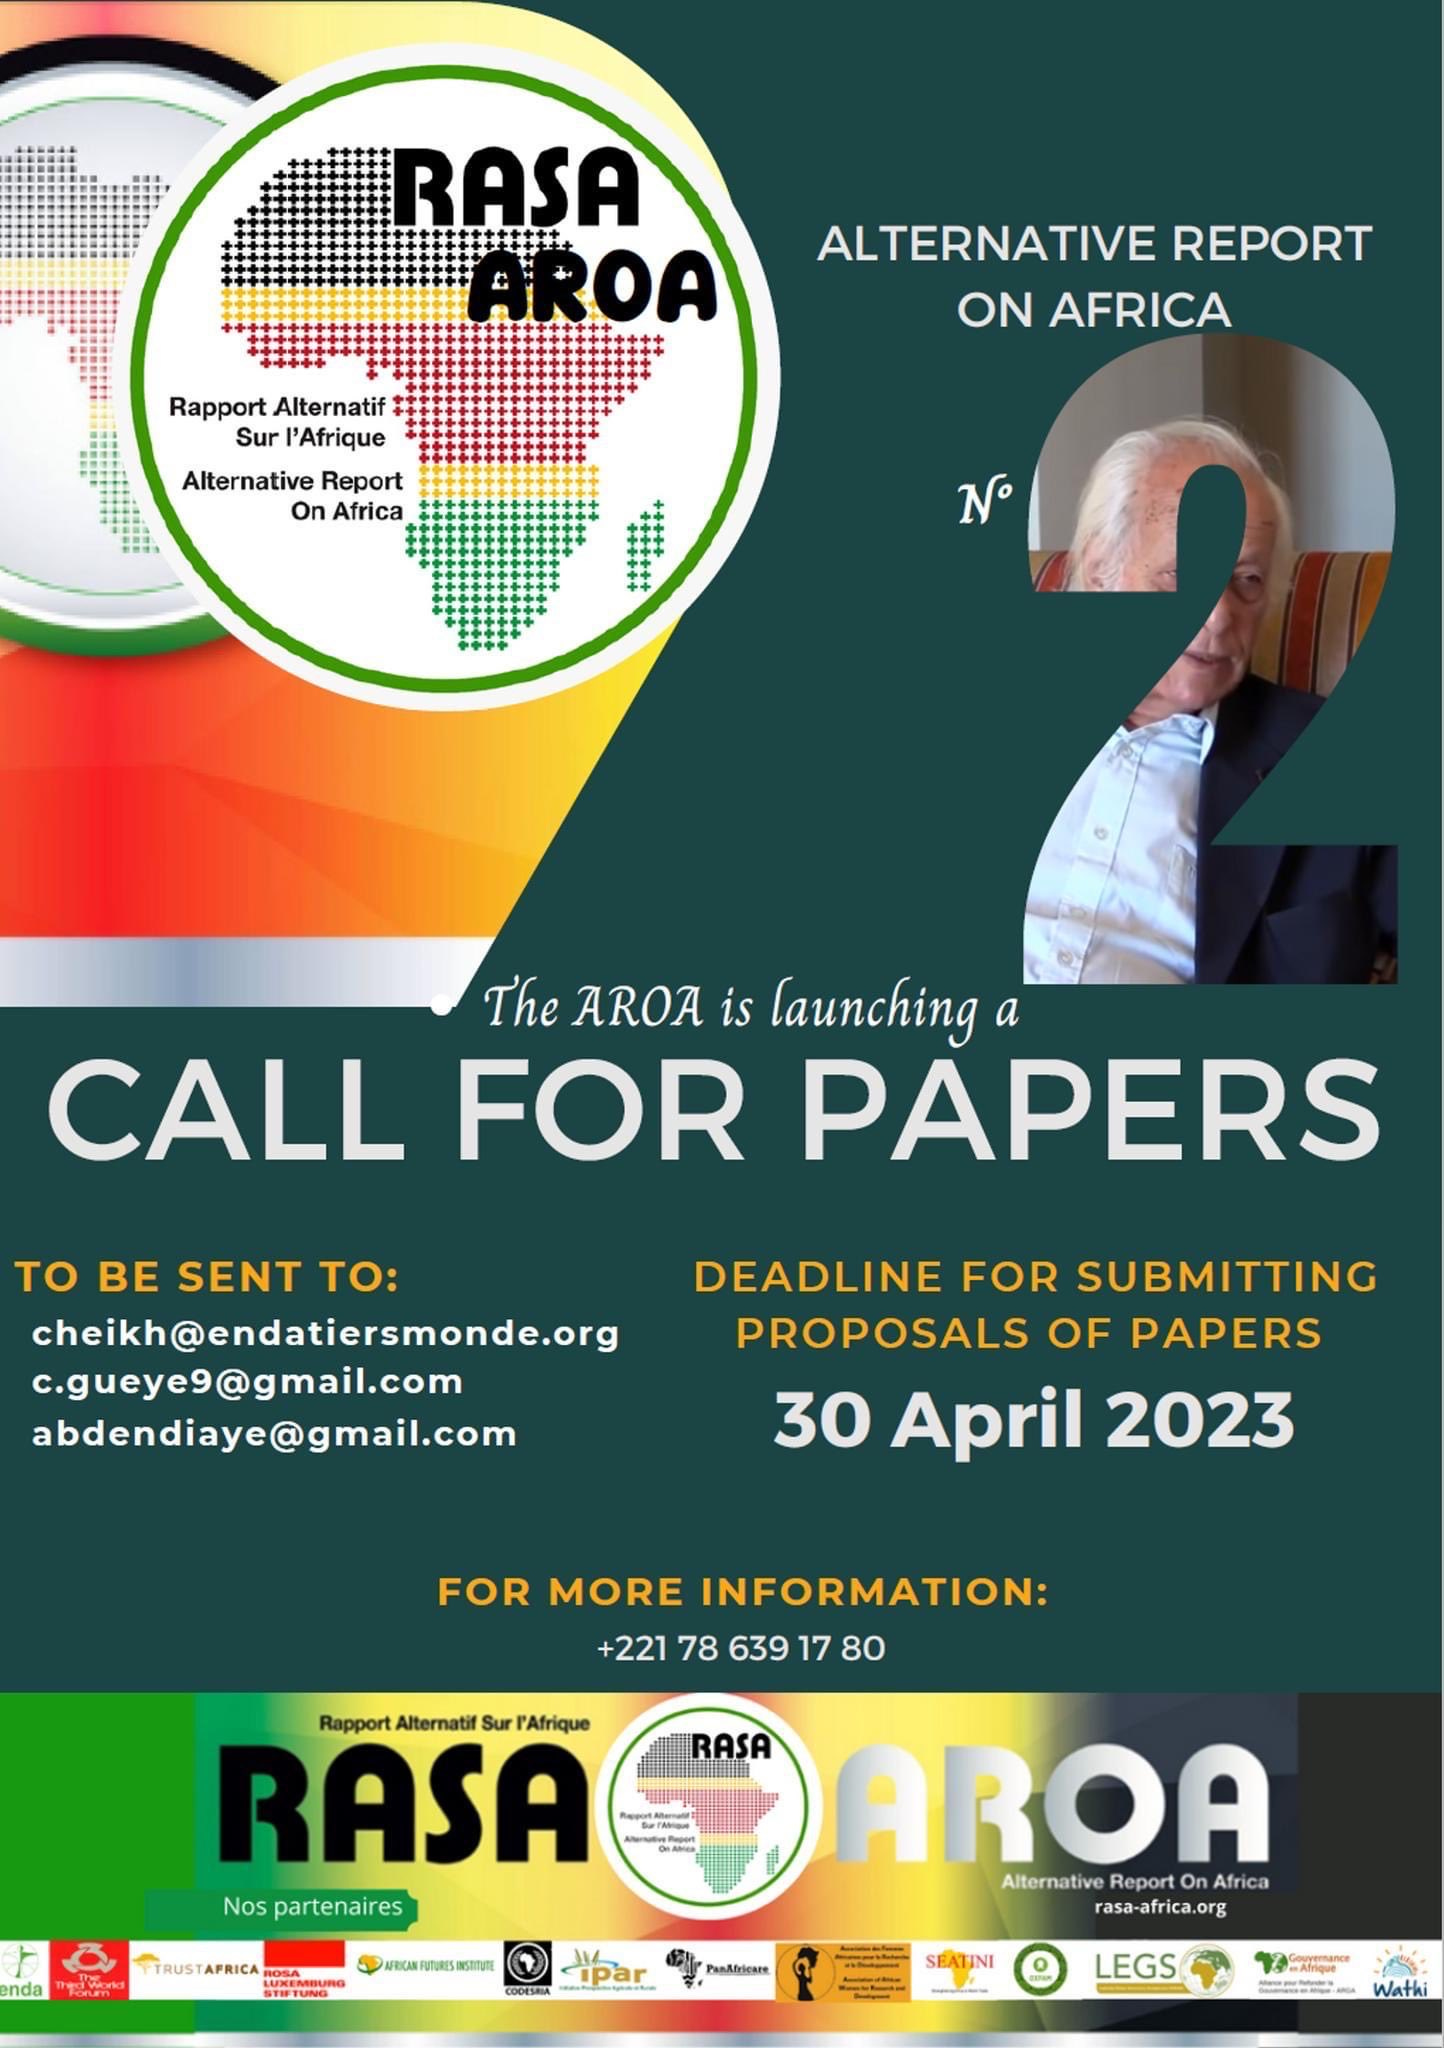 A poster calling for papers for the second Alternative report on Africa. They're due by 30 April 2023 and can be submitted to cheik@endatiersmonde.org, c.gueye9@gmail.com, or abdendiaye@gmail.com